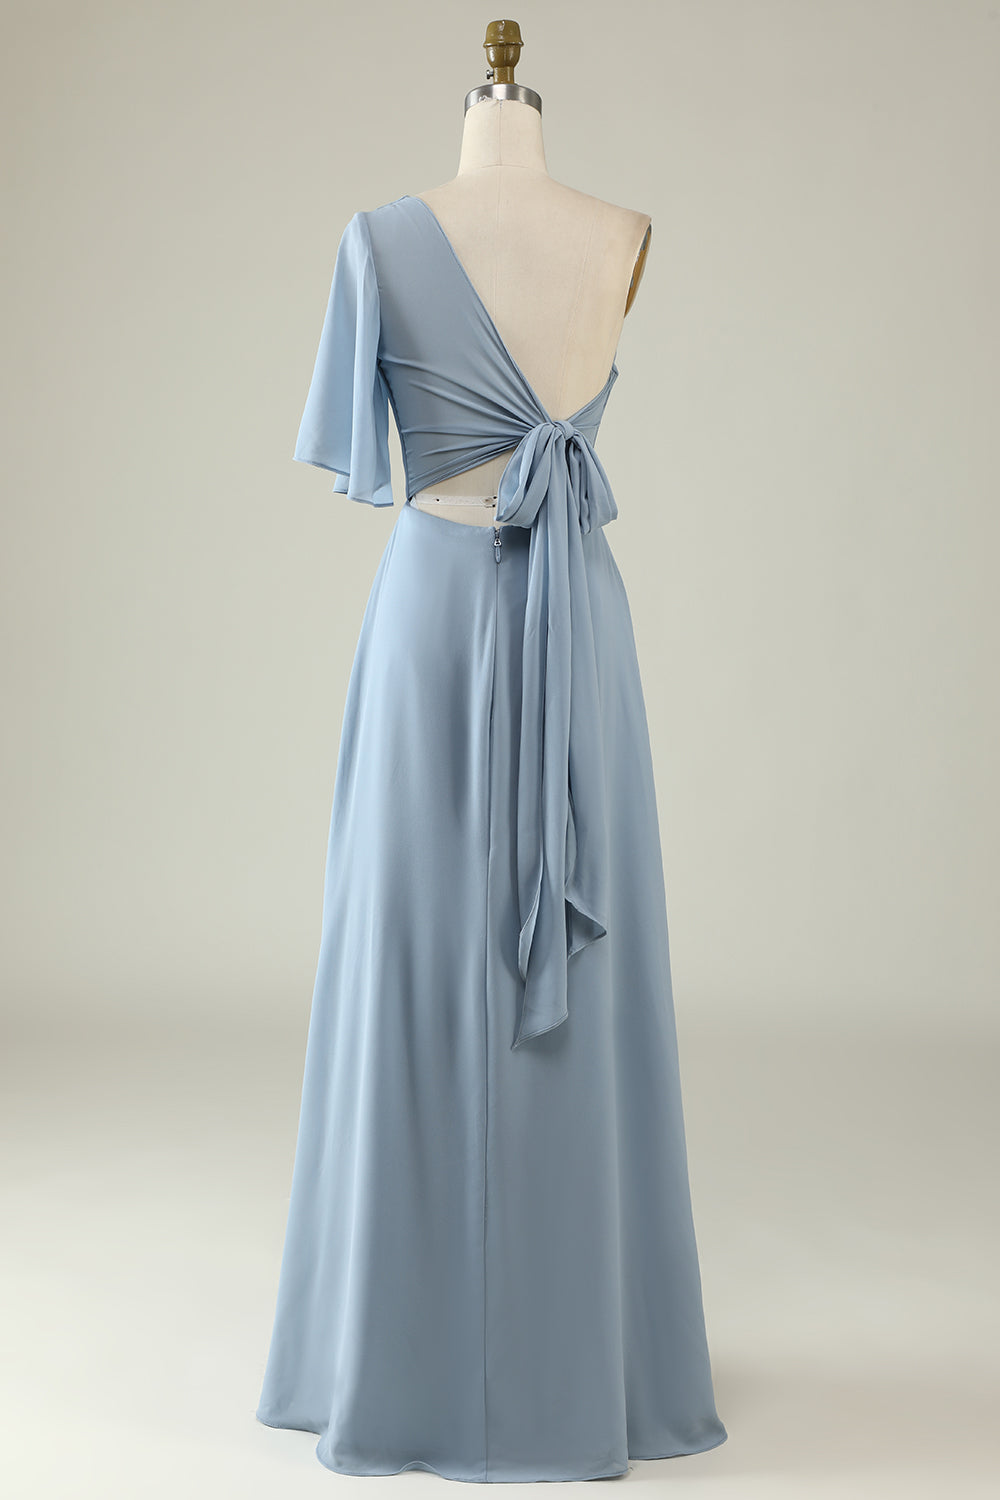 One Shoulder Long Chiffon Bridesmaid Dress With Bowtie